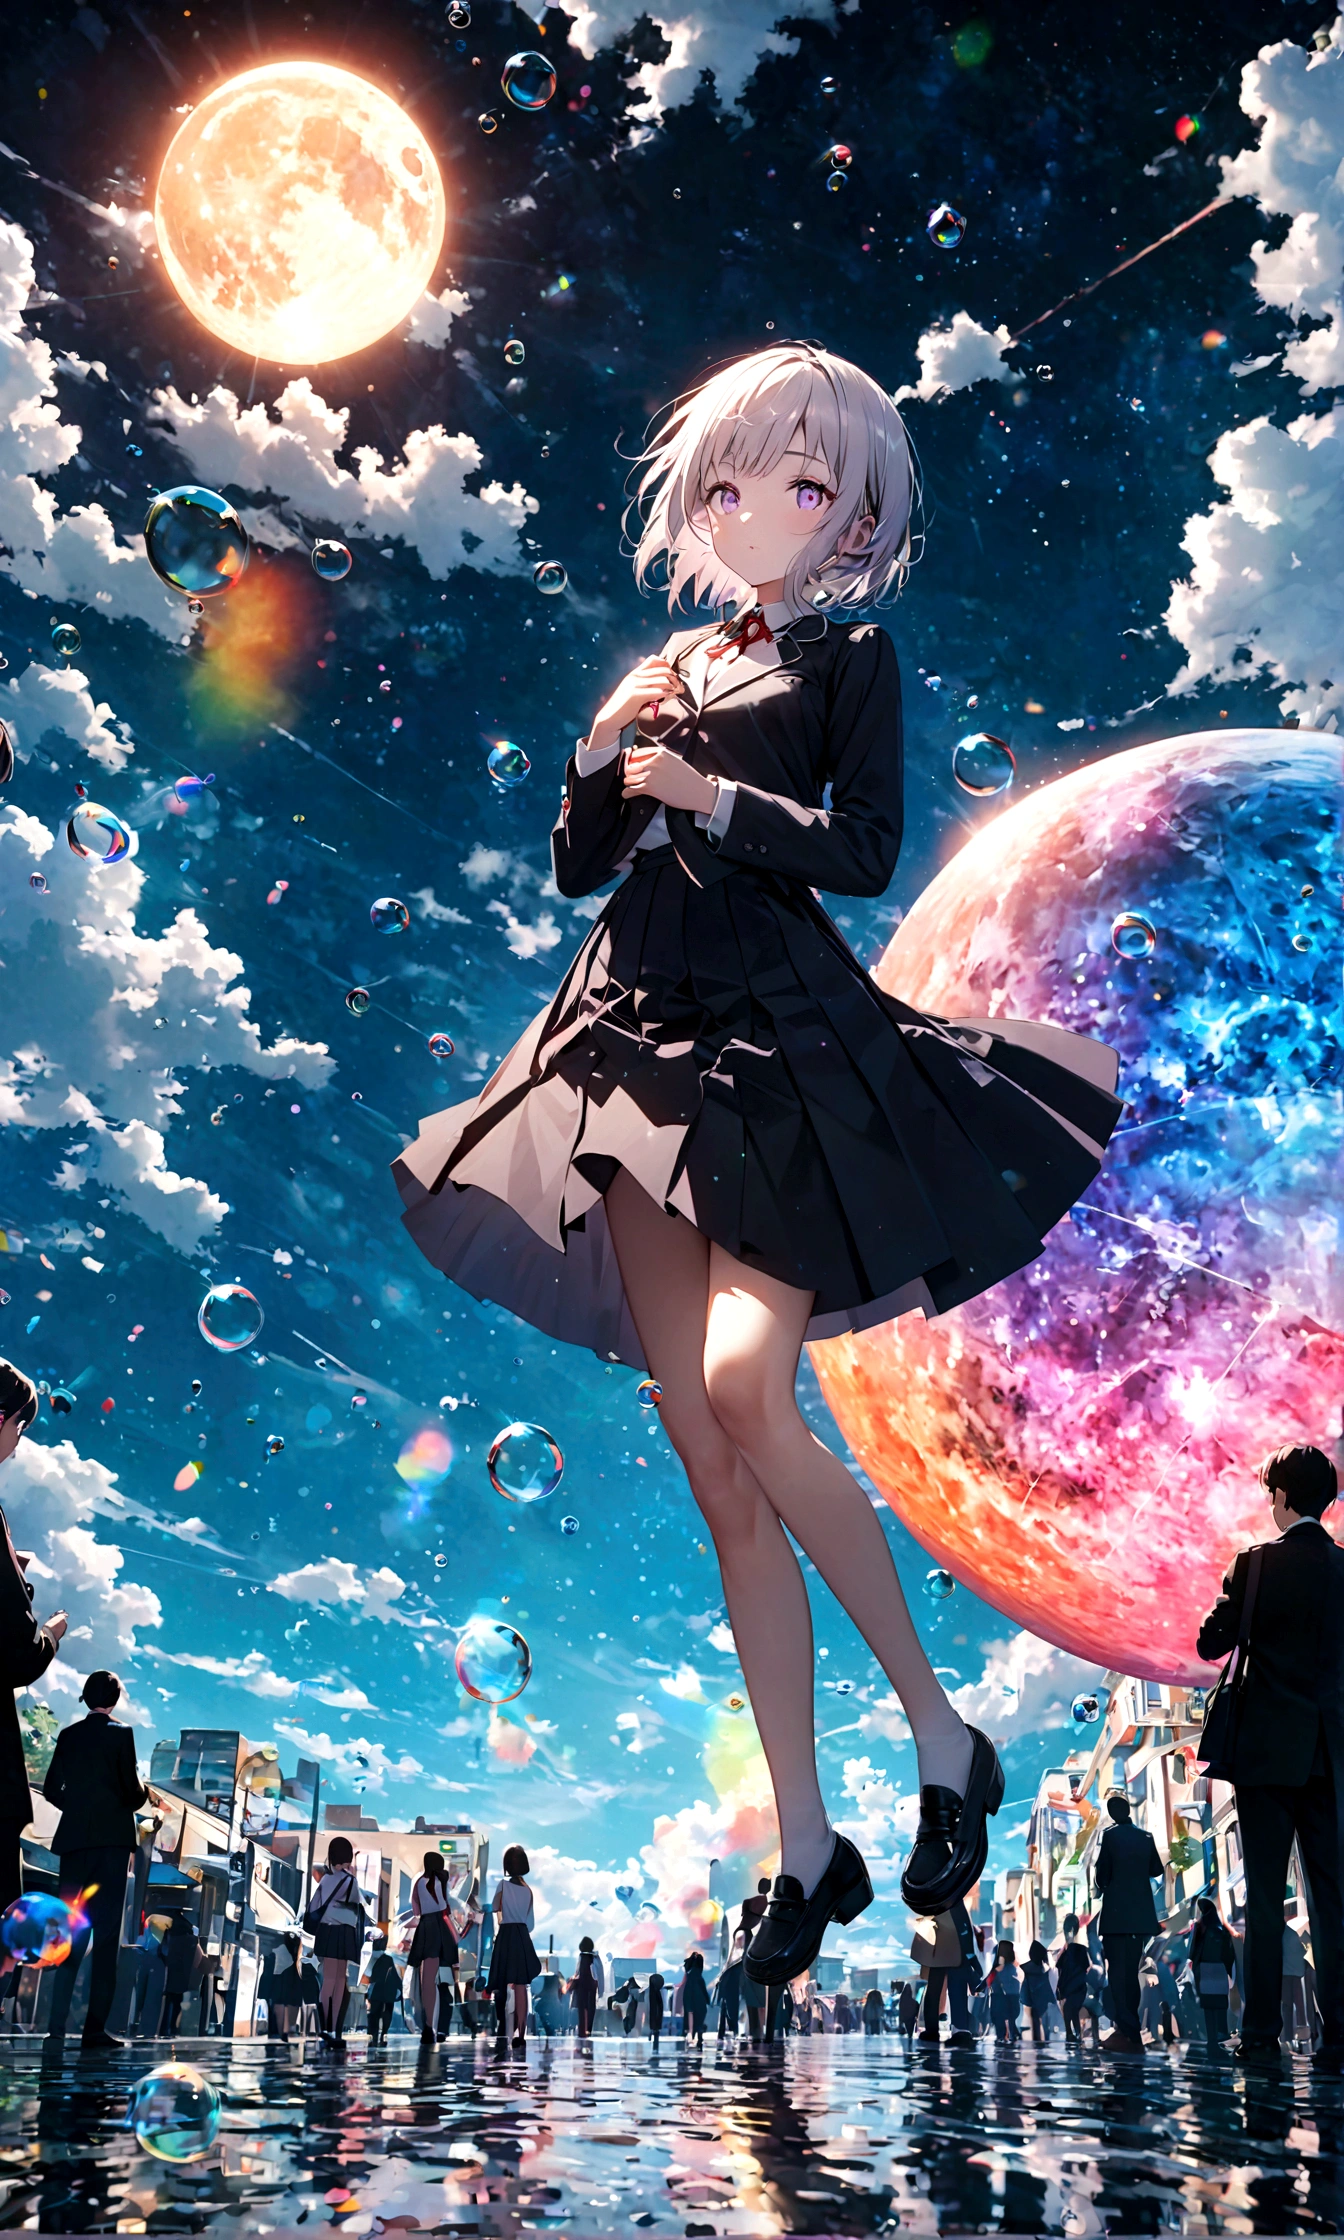 (masterpiece:1.2), (pale_skin:1.2), (alone:1.2), (woman)、(woman\(student, 20-year-old, ＪＫ, Short silver hair floating, Space-colored eyes, school black uniform, paleskin) Looking up at the sky), (A large glass-colored whale swims in the air), Beautiful sky, Beautiful Clouds, Colorful summer flowers are blooming everywhere., (Transparent bubbles shine like prisms here and there in the sky), There is a noon moon and a noon star in the sky, In a crowded downtown, BREAK ,quality\(8K,Highly detailed CG unit wallpaper, masterpiece,High resolution,top-quality,top-quality real texture skin,surreal,Increase the resolution,RAW Photos,highest quality,Very detailed,wallpaper,Cinema Lighting,Ray-tracing,Golden Ratio\),(Long Shot),Wide Shot,